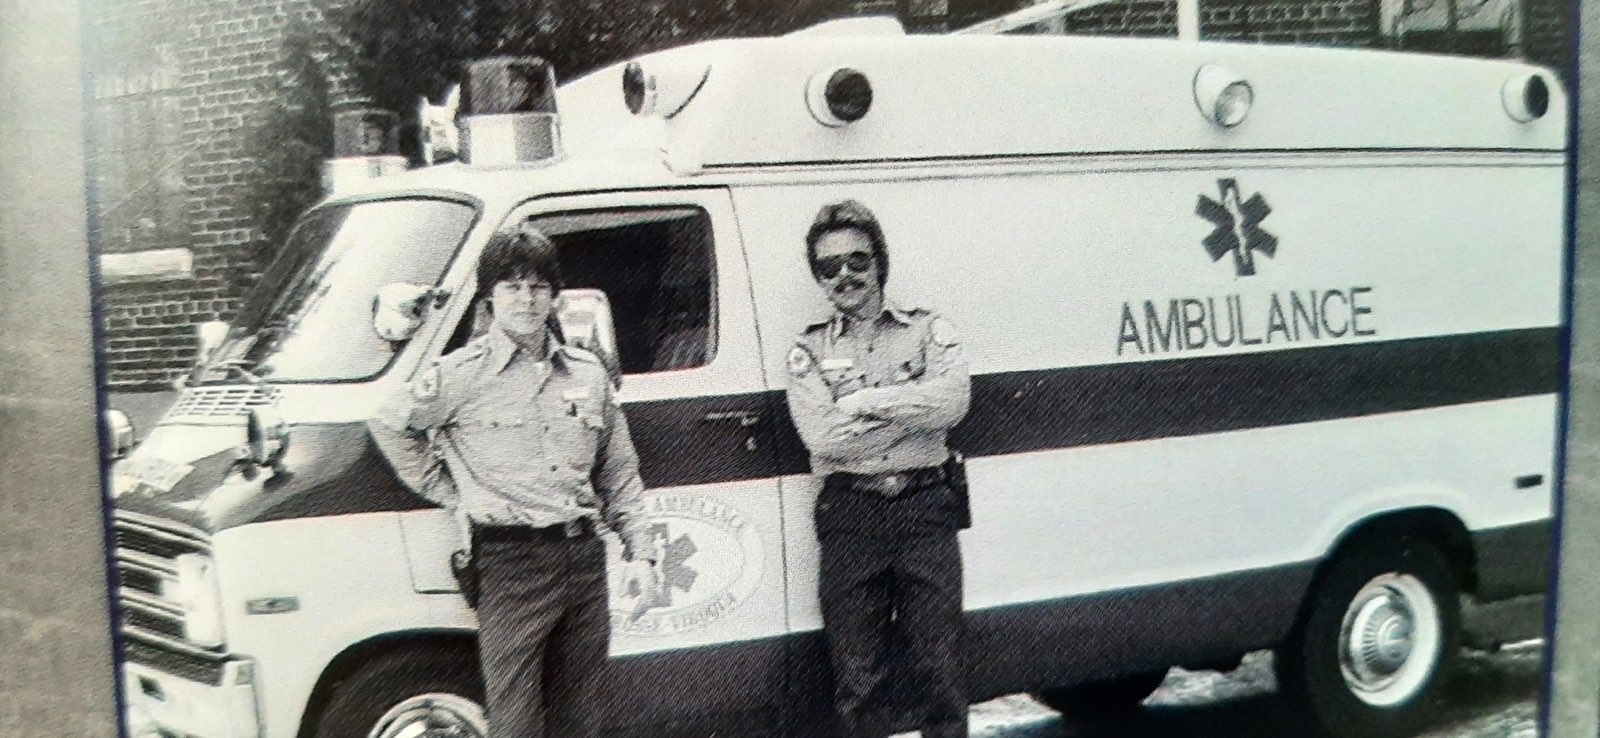 Rich Rice in front of an ambulance in 1980